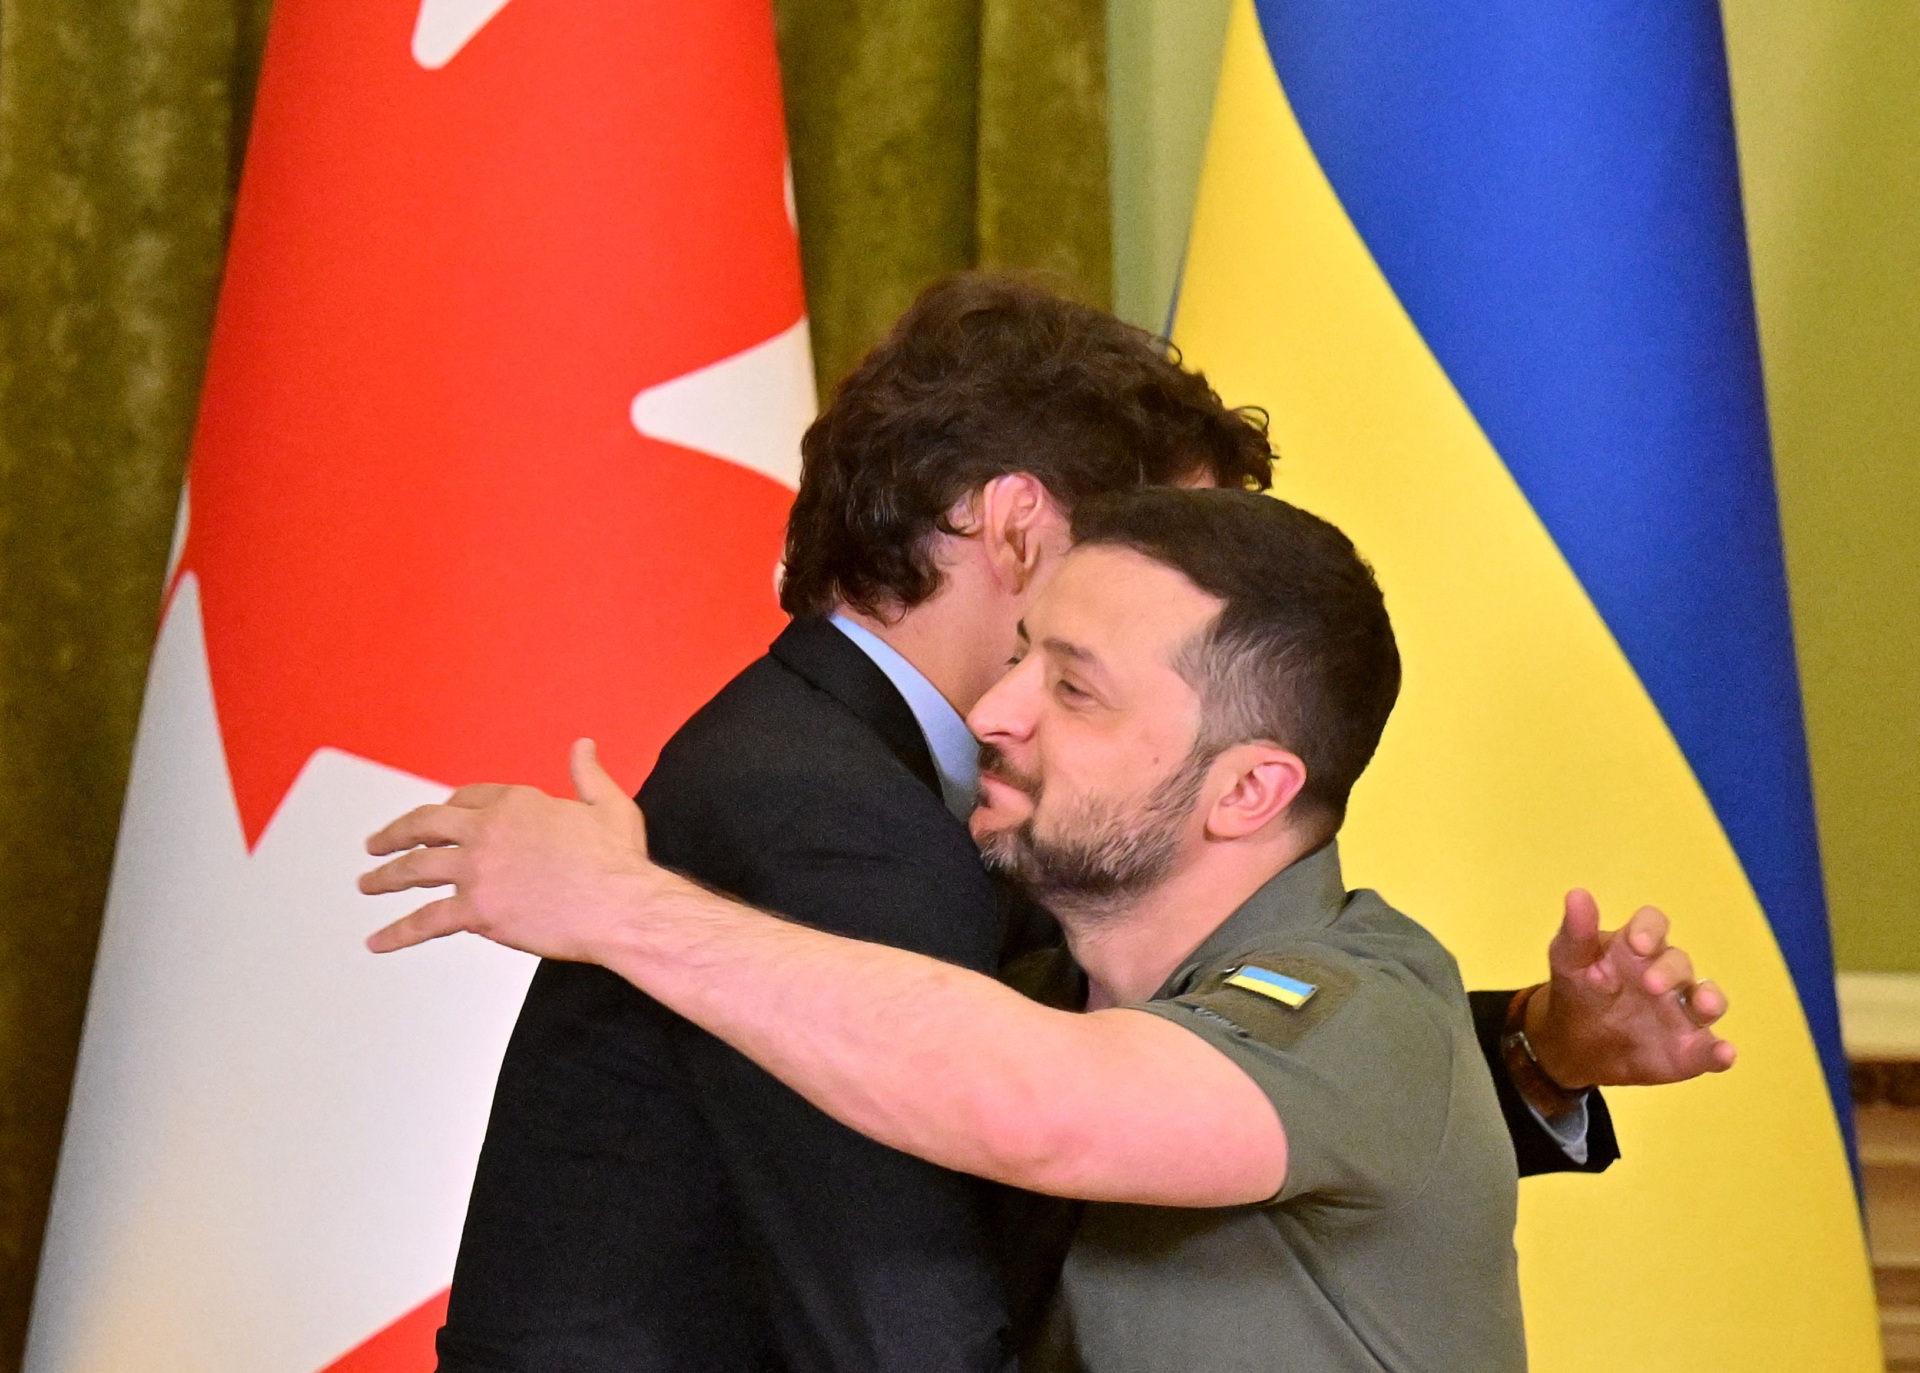 Ukrainian President Volodymyr Zelensky (R) and Canadian Prime Minister Justin Trudeau hug during a press conference following their talks in Kyiv on June 10, 2023. (Photo by Sergei SUPINSKY / AFP) (Photo by SERGEI SUPINSKY/AFP via Getty Images)